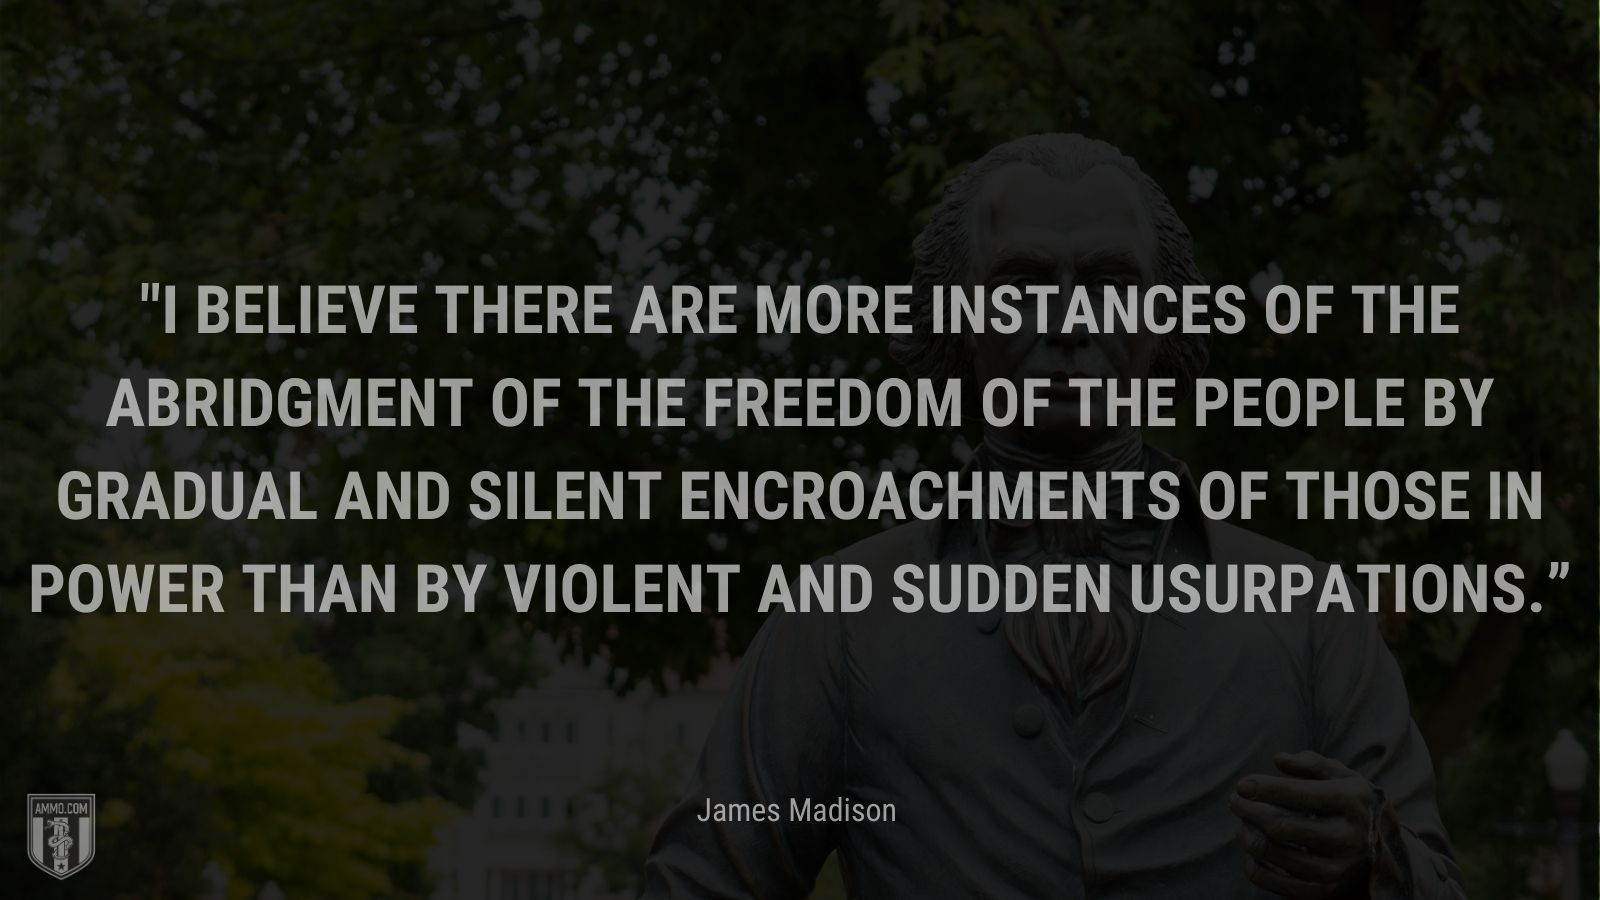 &ldquoI believe there are more instances of the abridgment of the freedom of the people by gradual and silent encroachments of those in power than by violent and sudden usurpations.;” - James Madison